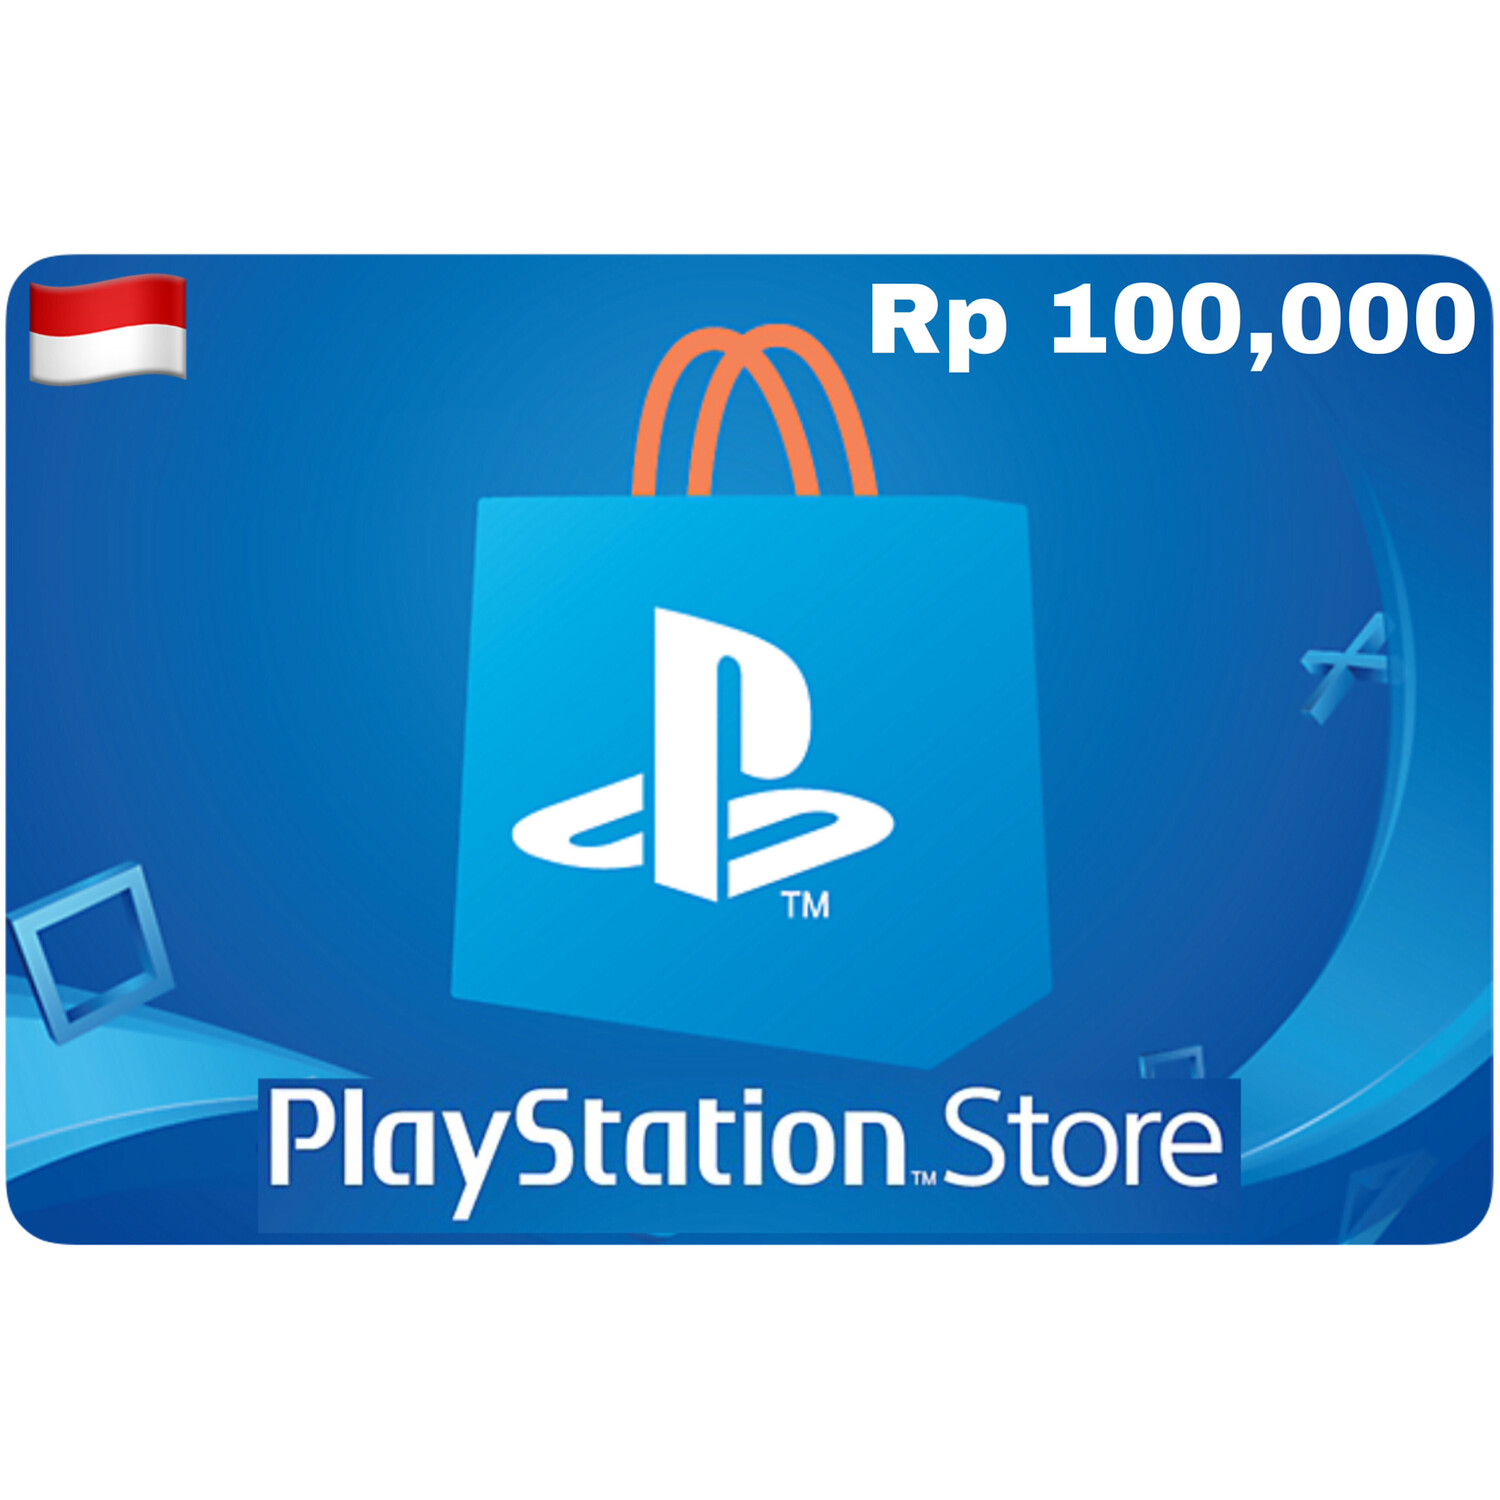 Promo Playstation Store Gift Card Indonesia IDR 100,000